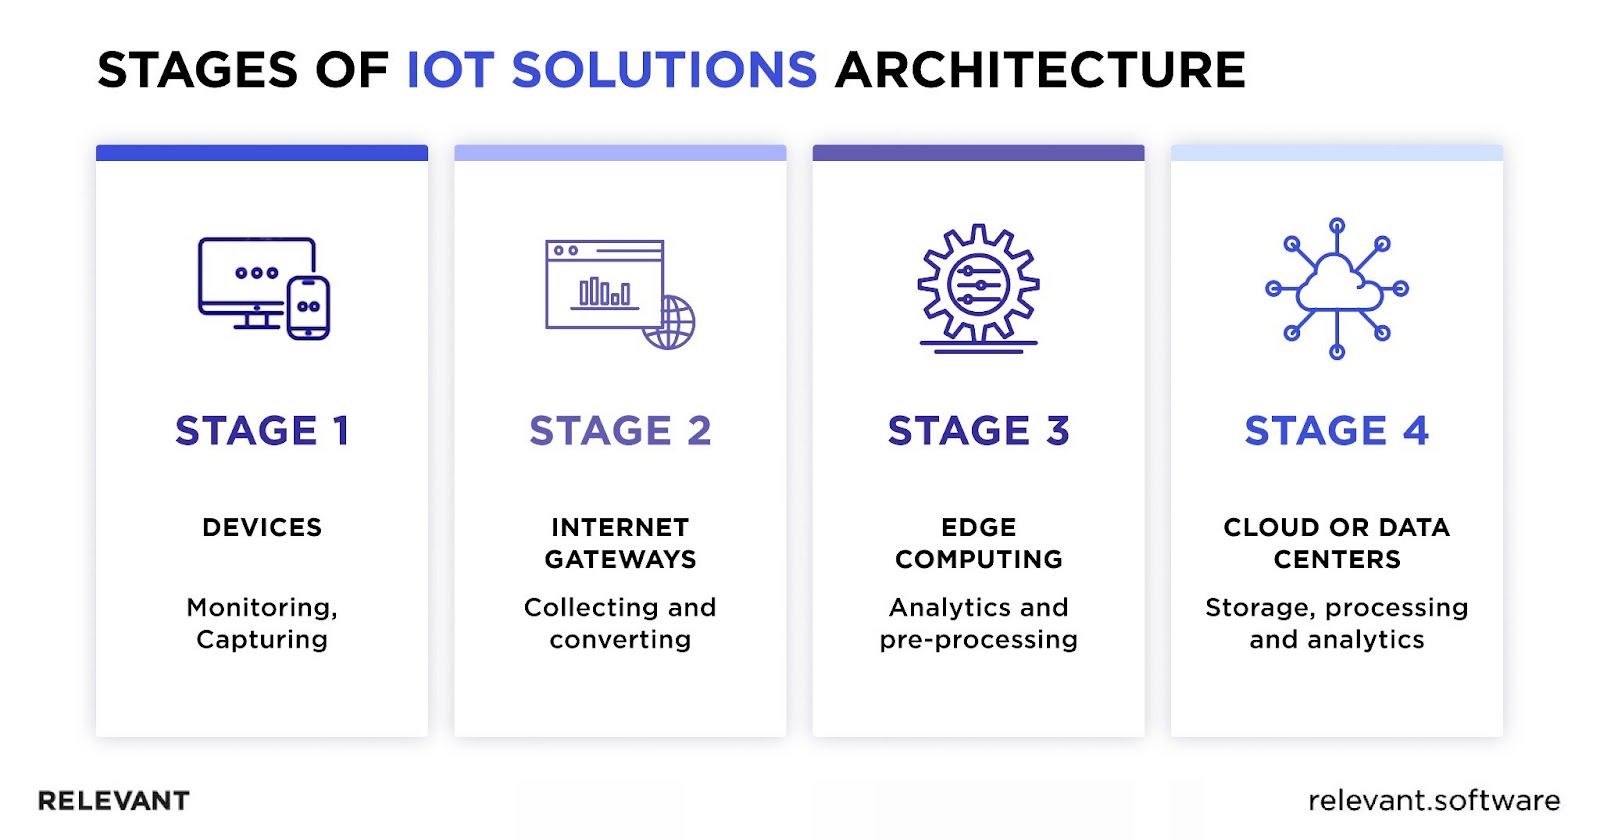 Stages of IoT Architecture